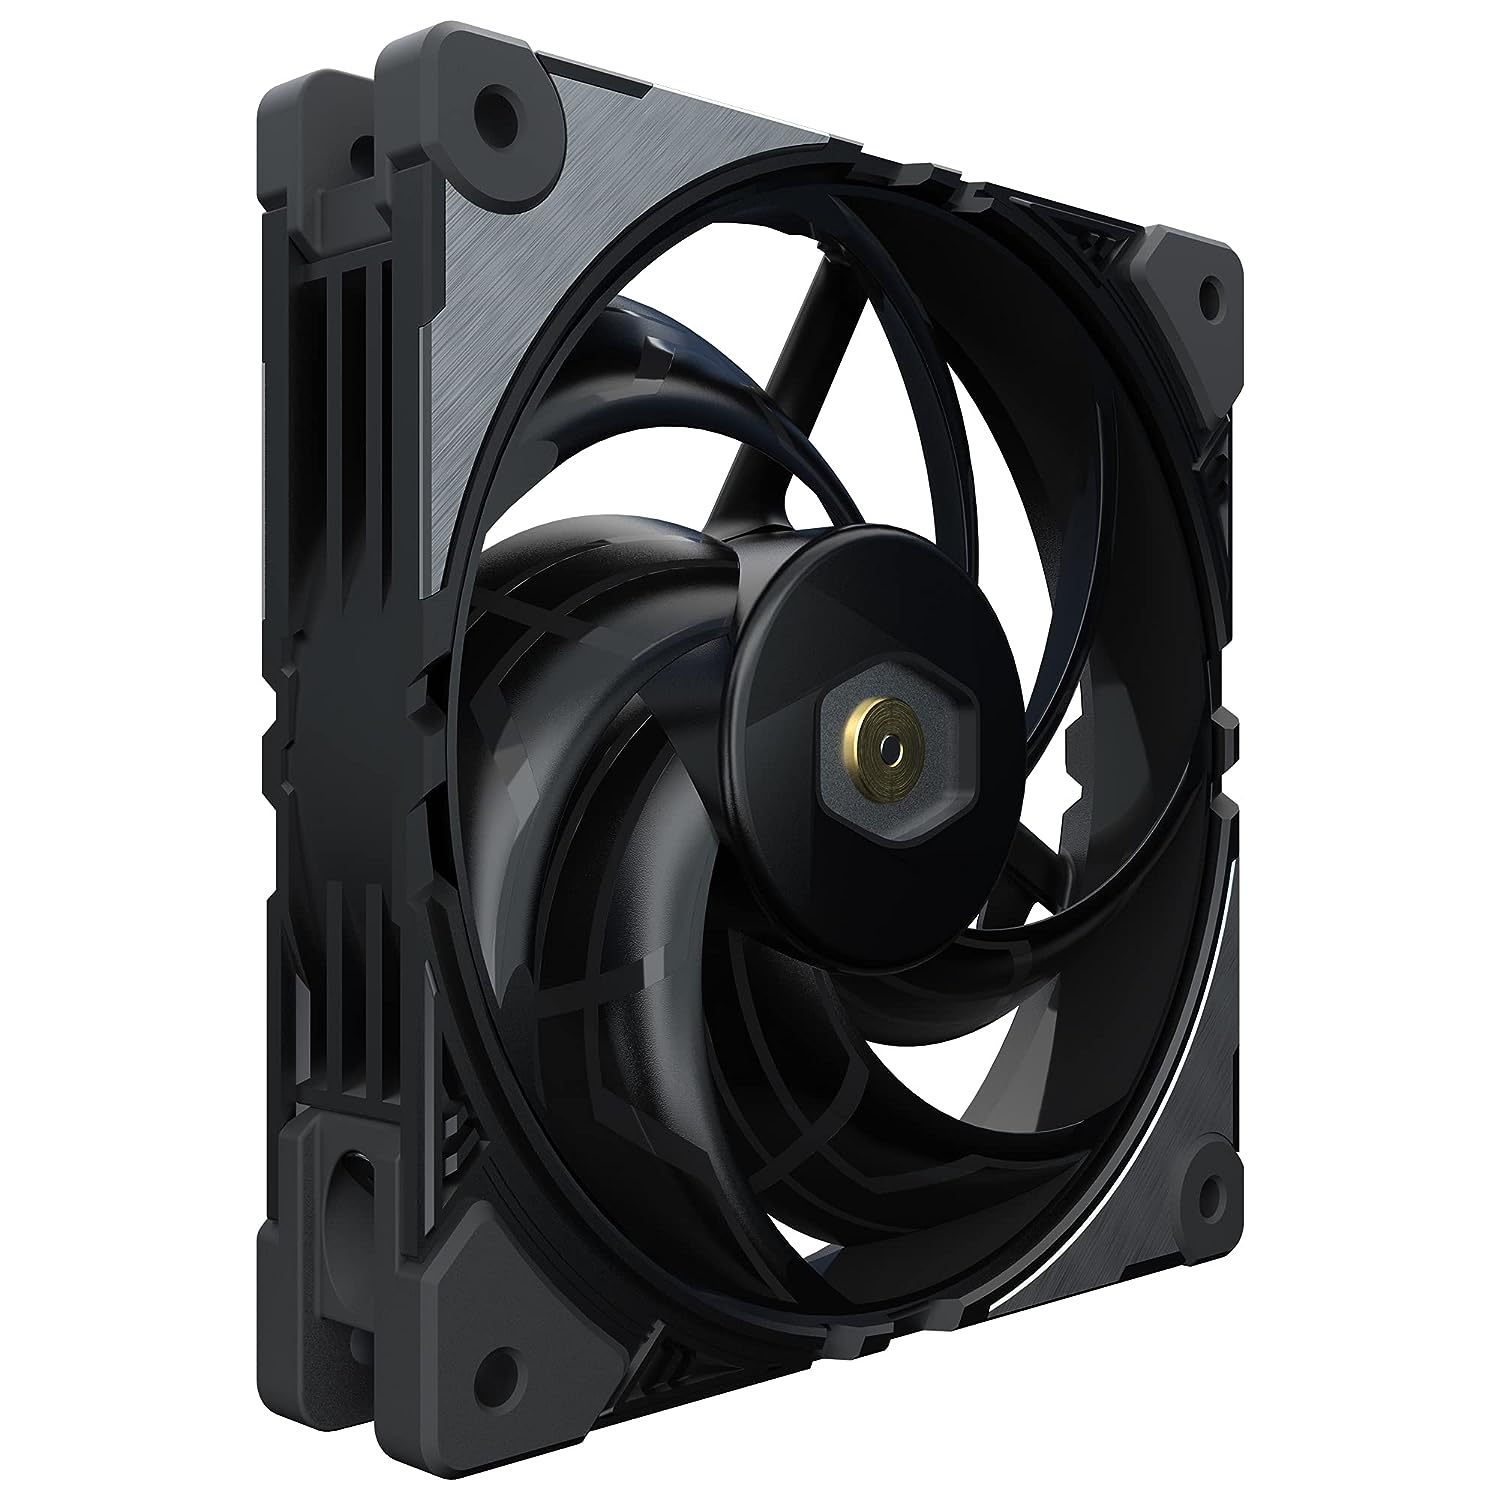 120mm Cooler Master SickleFlow V2 PWM Air Balance Curve, Sealed Bearing Case Fan $7 & More + Free Shipping w/ Prime or on $35+